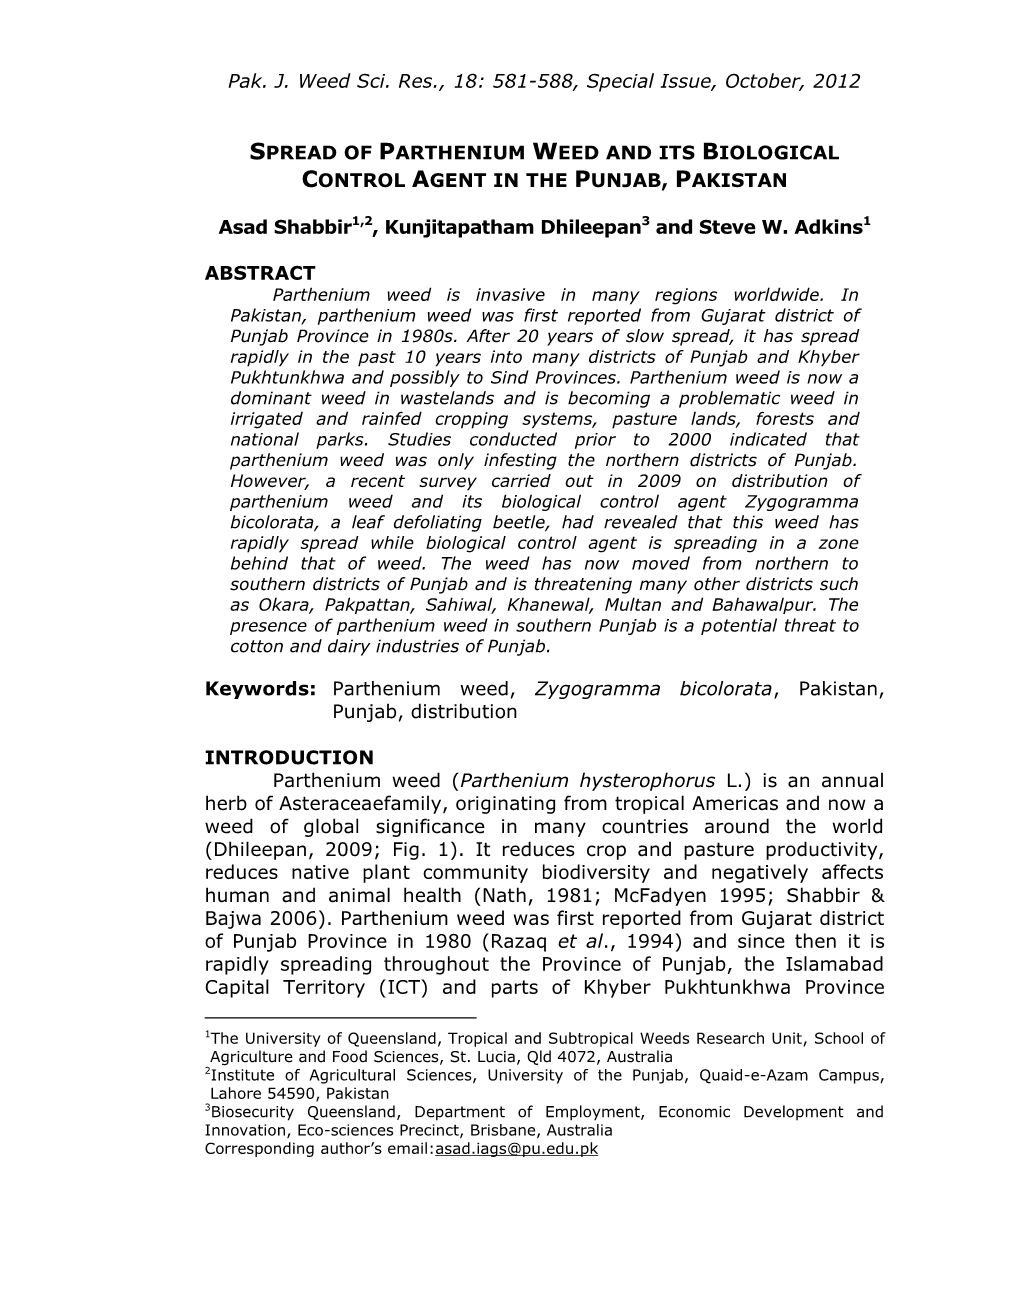 Pak. J. Weed Sci. Res., 18: 581-588, Special Issue, October, 2012